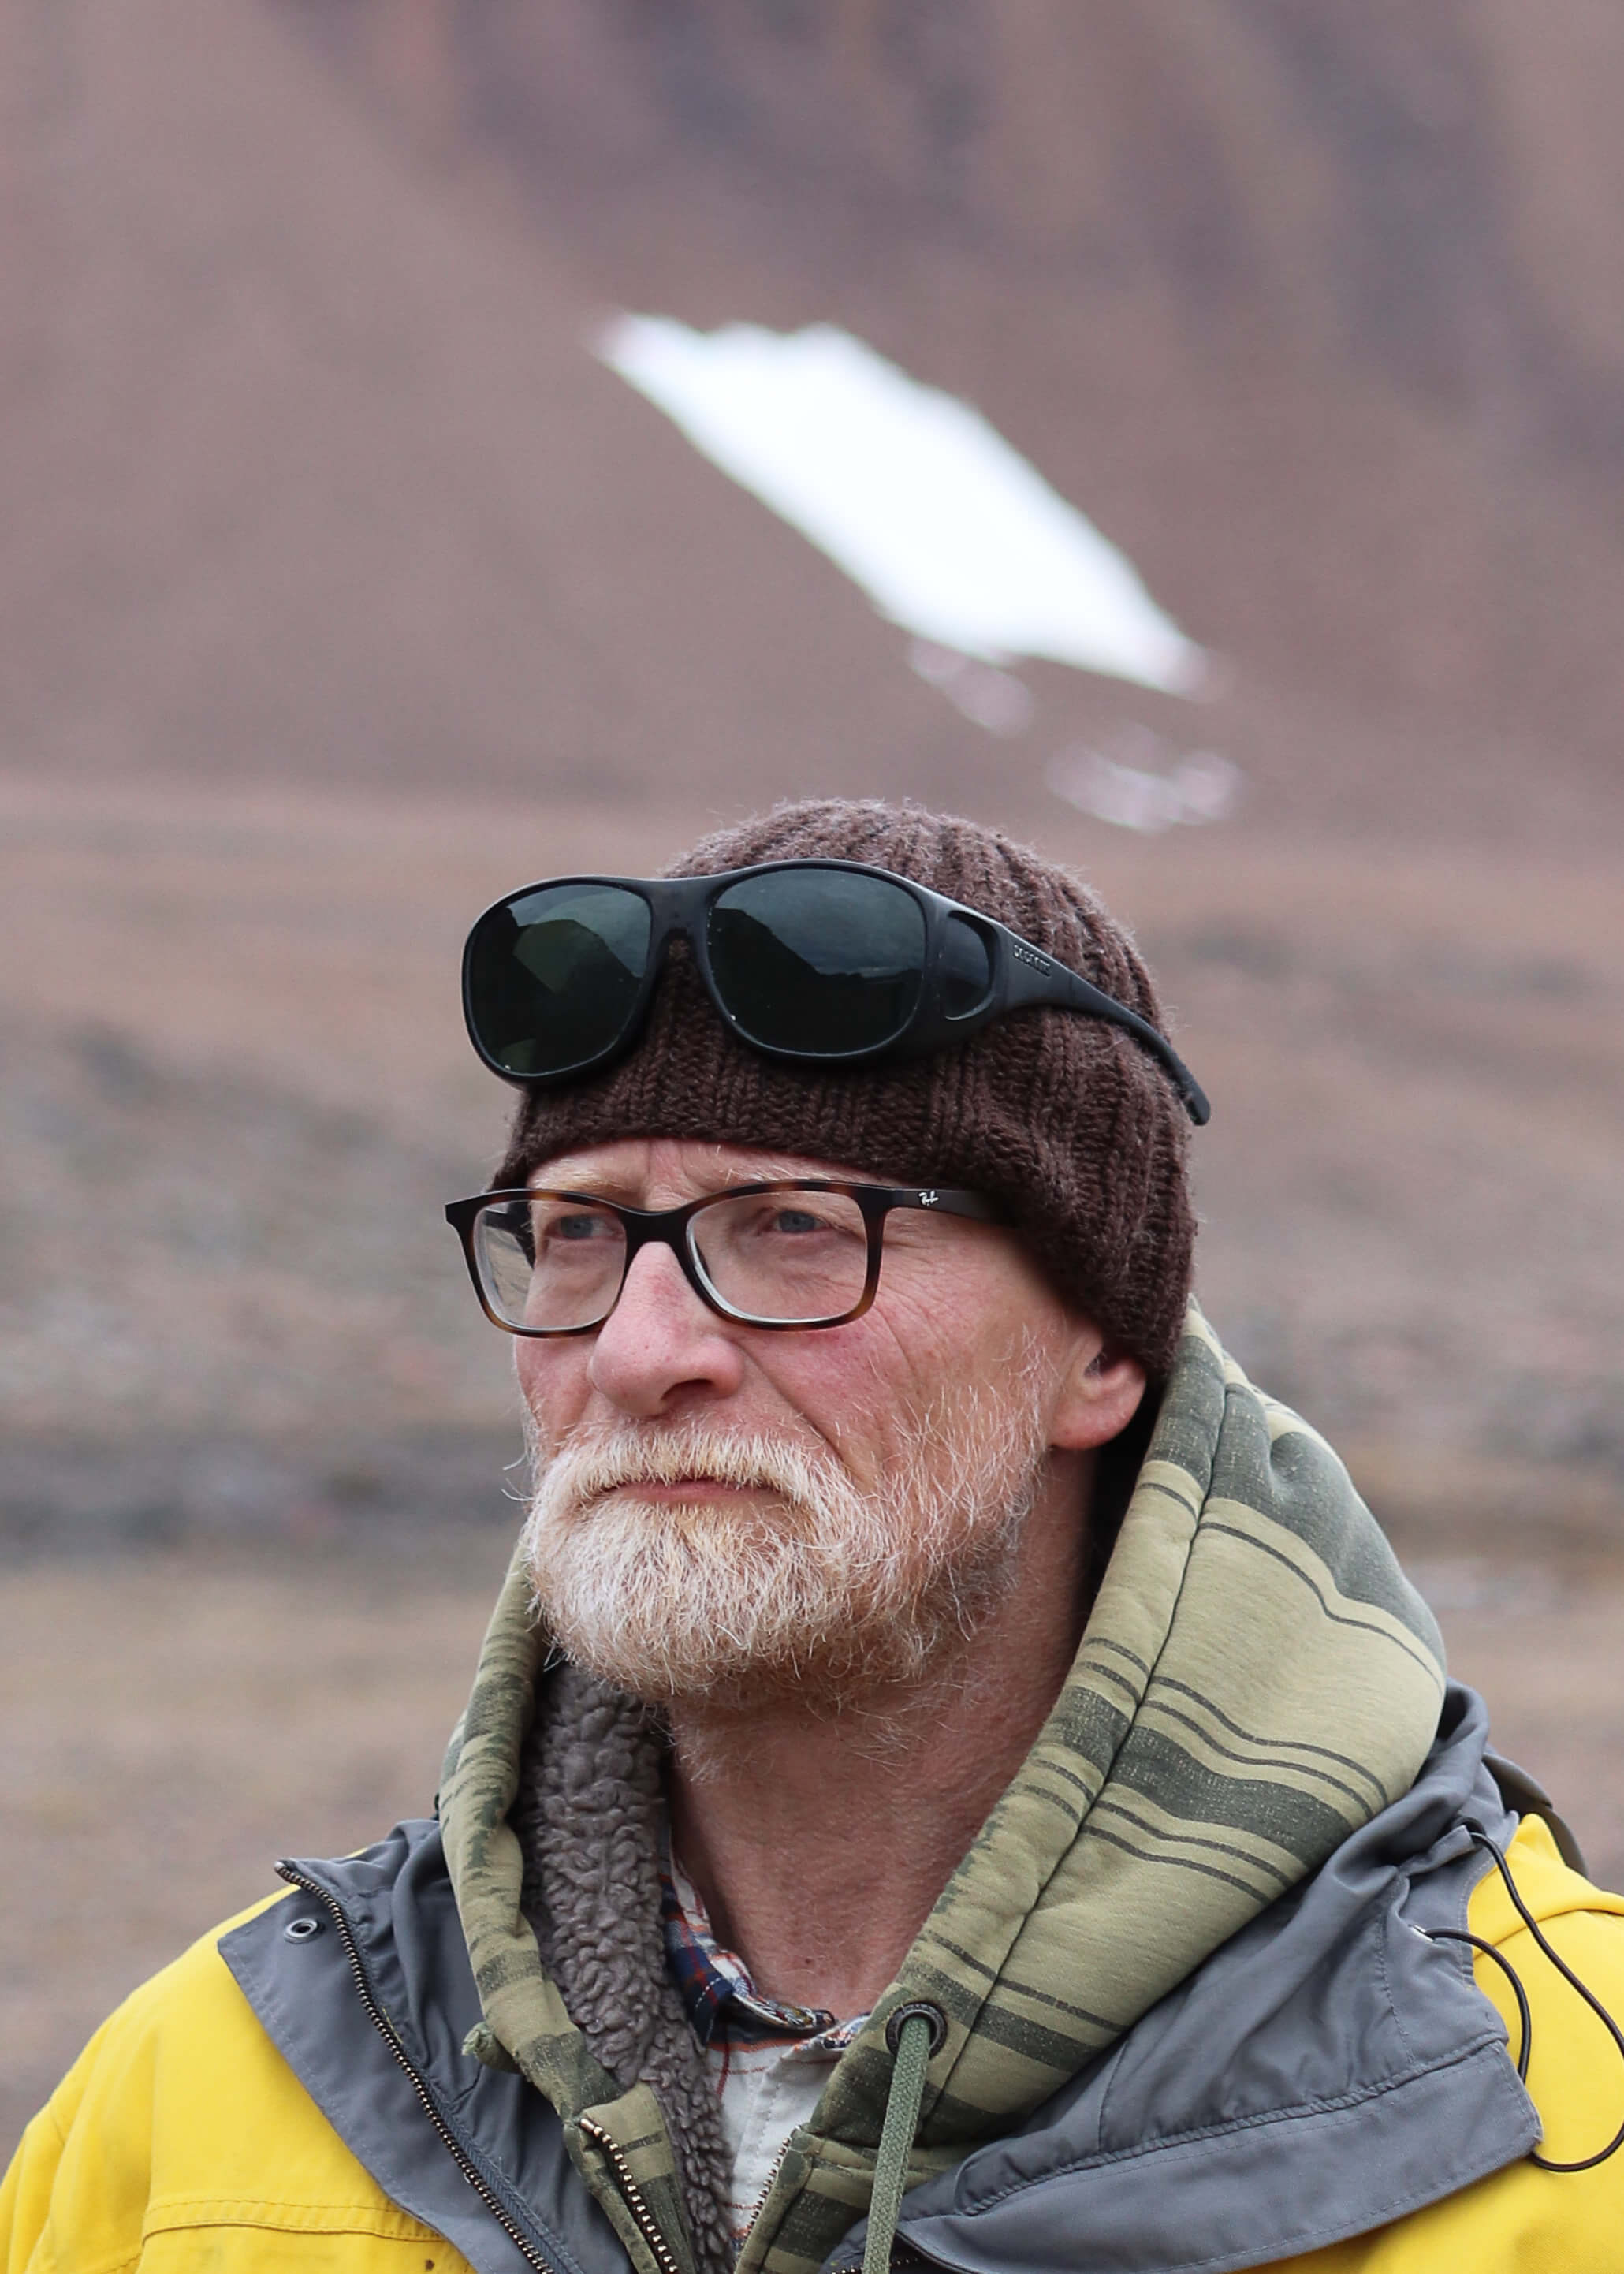 portrait of a man wearing glasses, a yellow jacket and a beanie